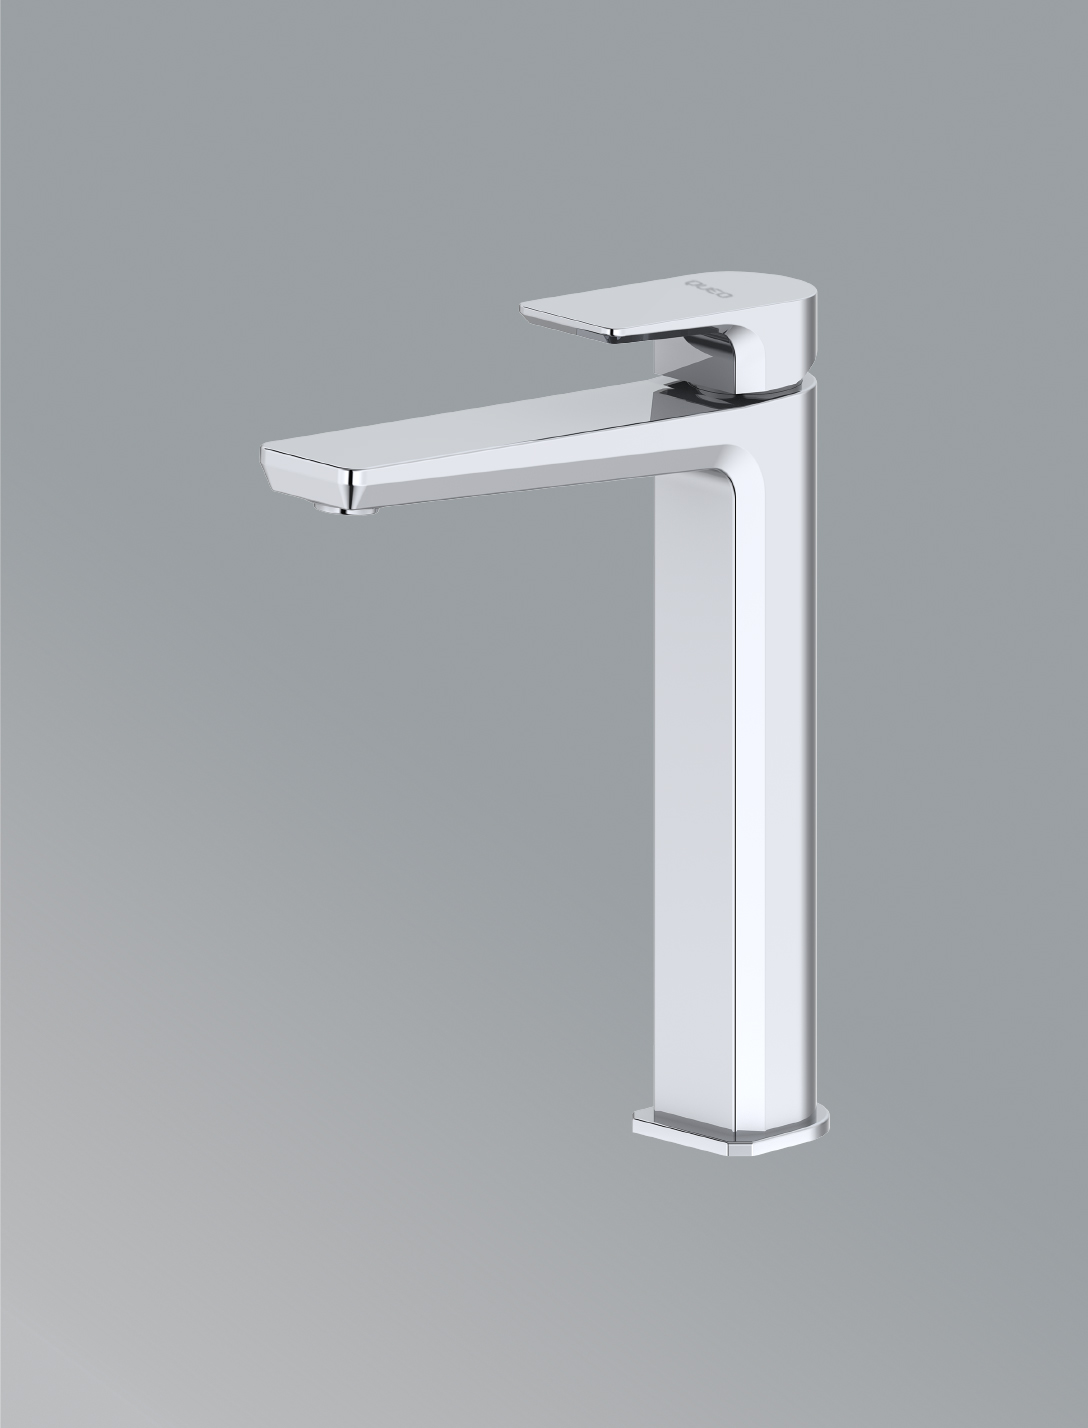  Single Control Basin Faucet Tall In Polished Chrome